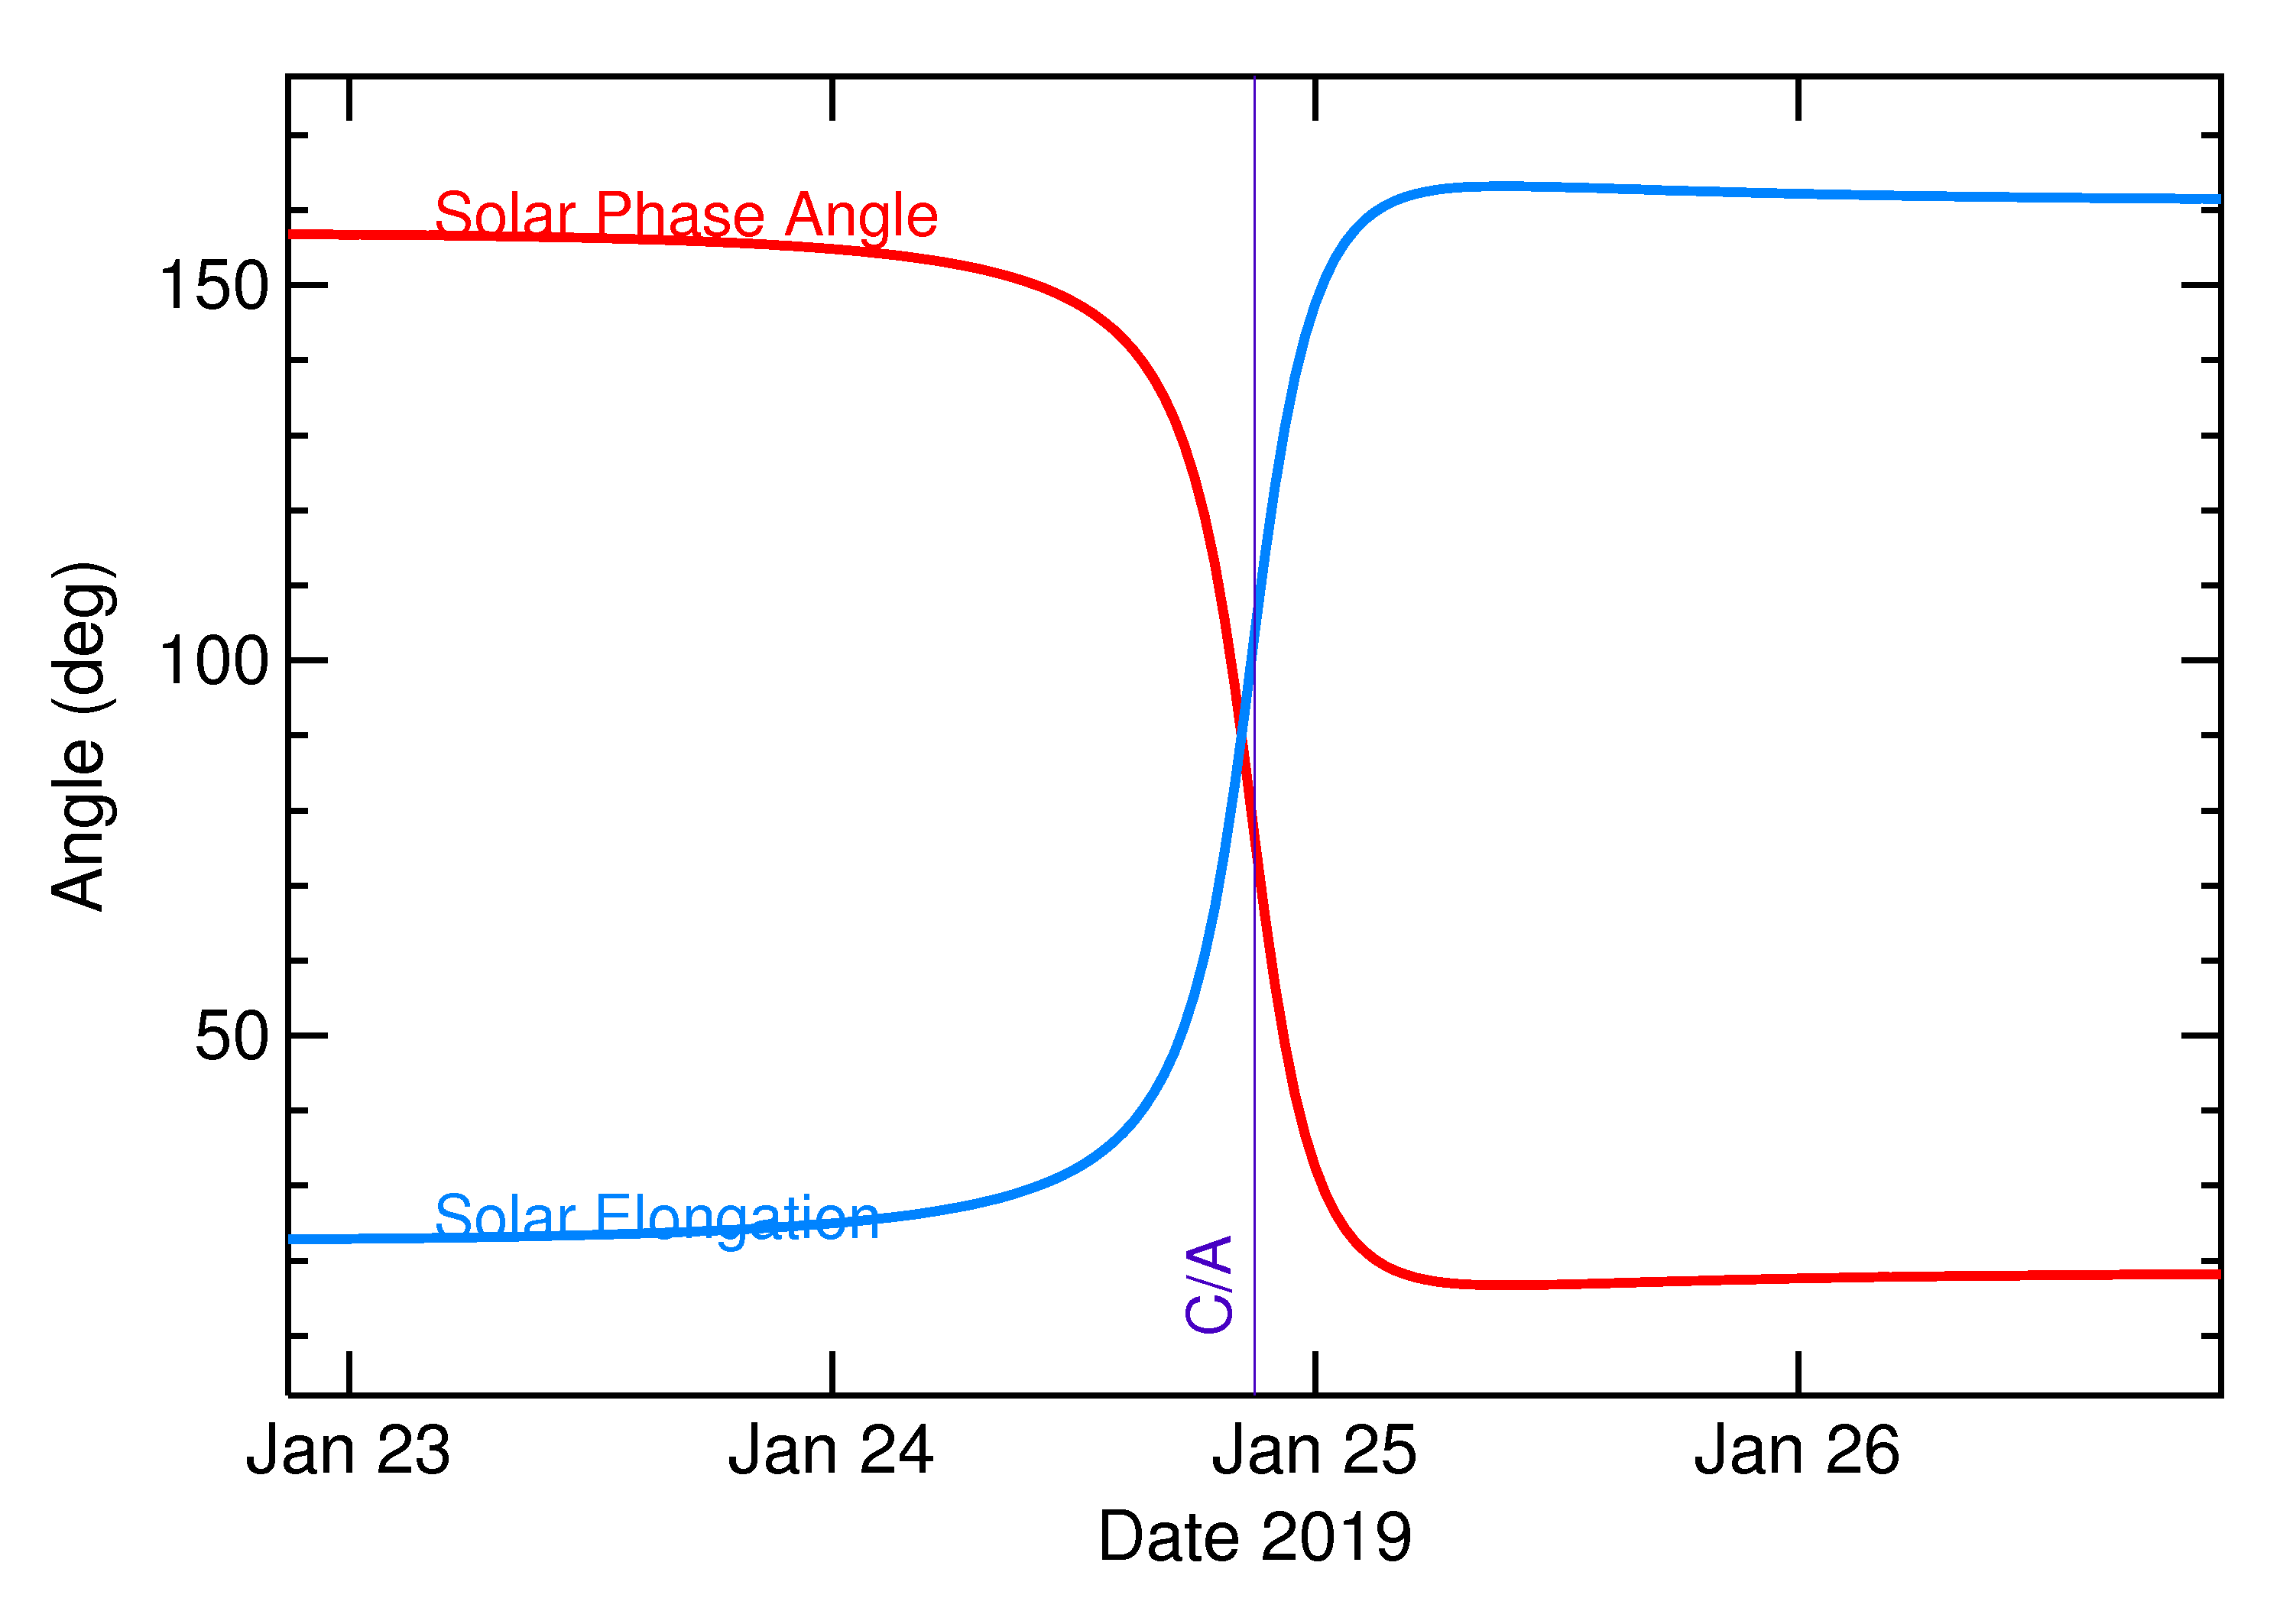 Solar Elongation and Solar Phase Angle of 2019 BV1 in the days around closest approach